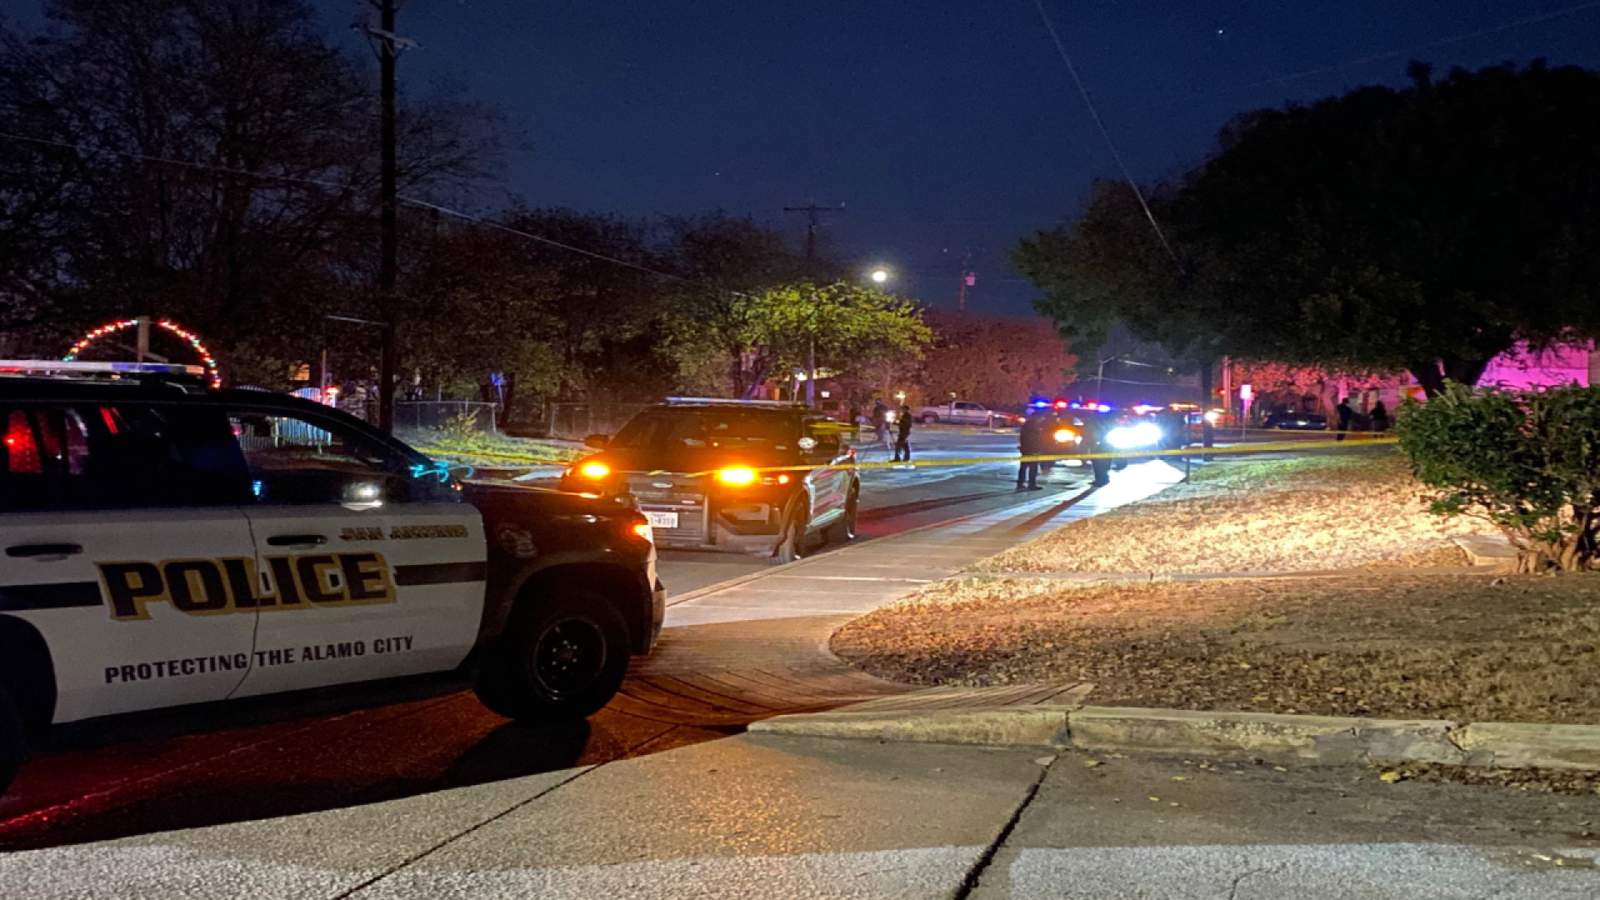 14-year-old fatally shot on San Antonio’s South Side attended school in Harlandale ISD